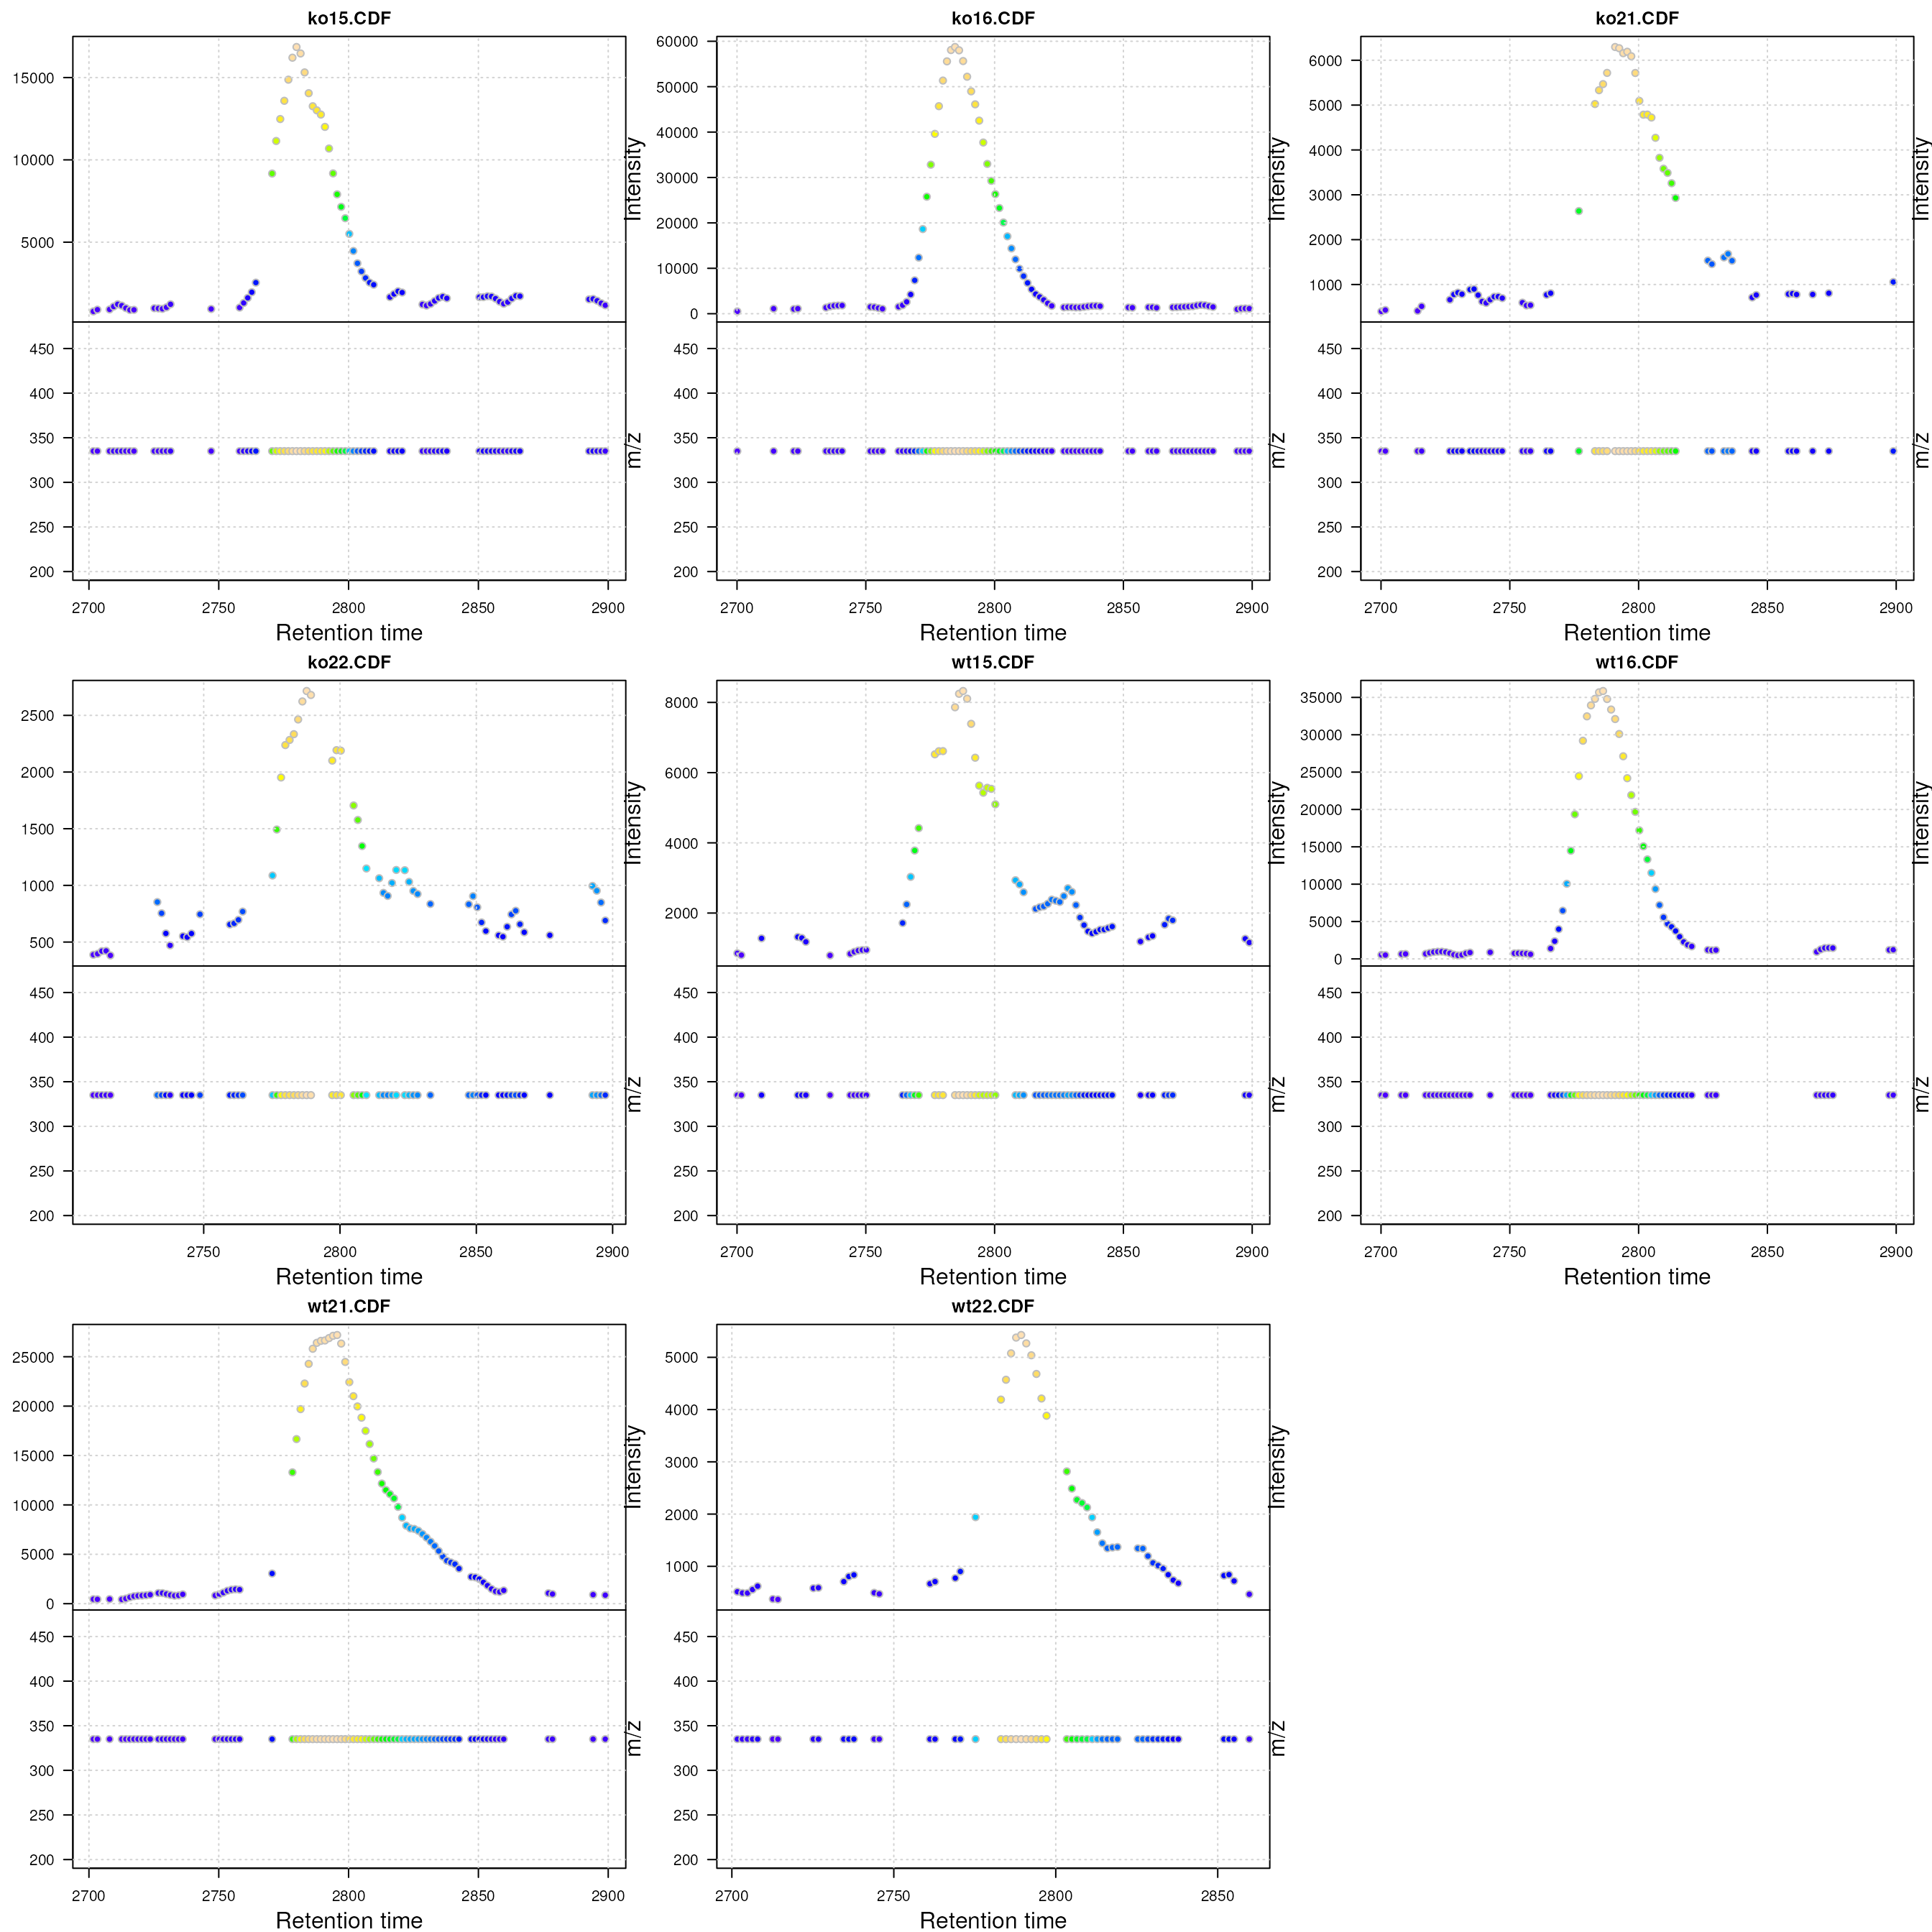 Visualization of the raw MS data for one peak. For each plot: upper panel: chromatogram plotting the intensity values against the retention time, lower panel m/z against retention time plot. The individual data points are colored according to the intensity.